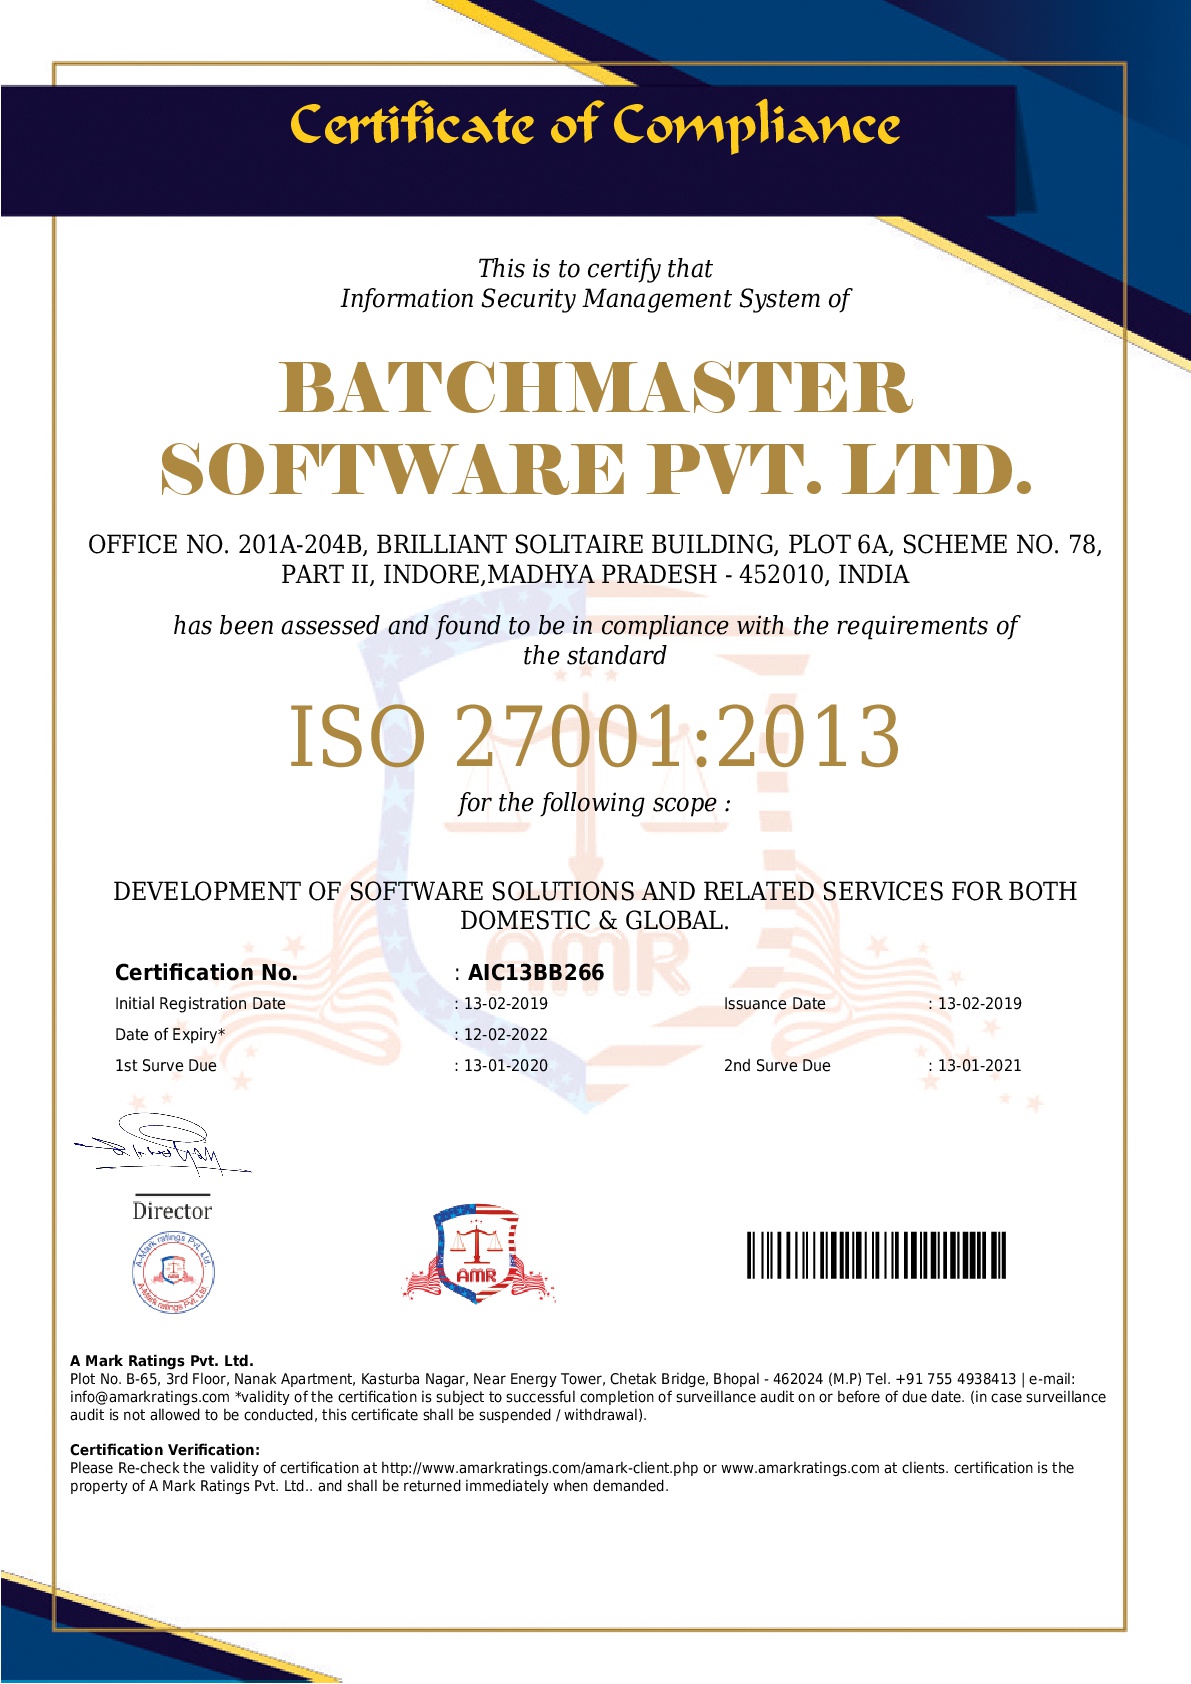 batchmaster is iso 27001-2013 certification